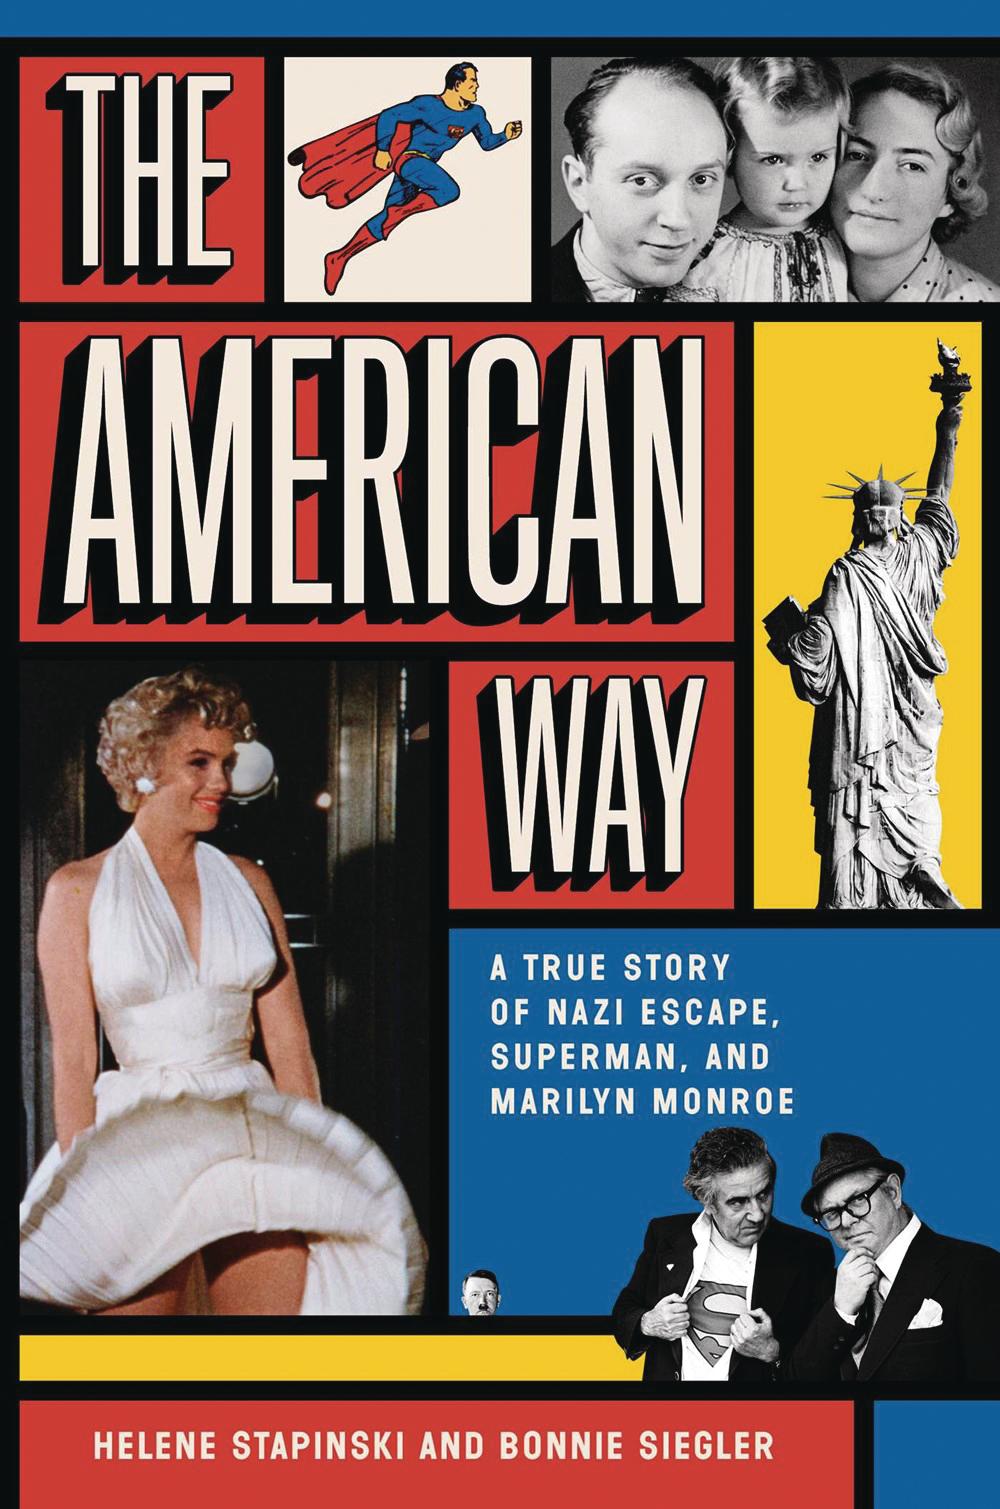 The American Way A True Story of Nazi Escape, Superman, And Marilyn Monroe Hardcover